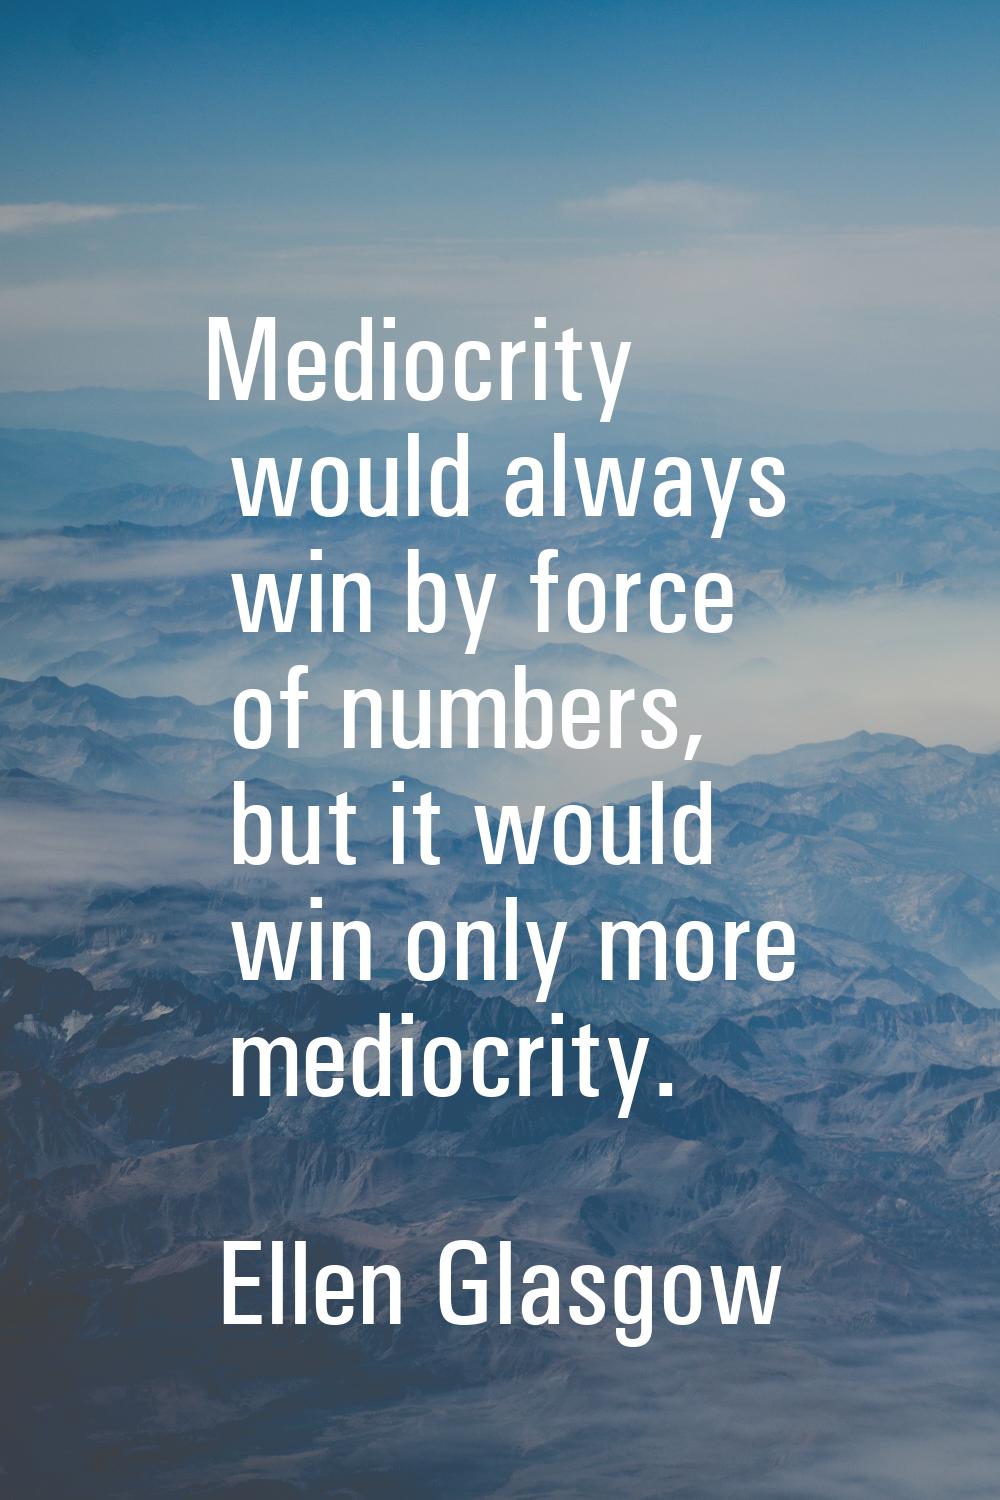 Mediocrity would always win by force of numbers, but it would win only more mediocrity.